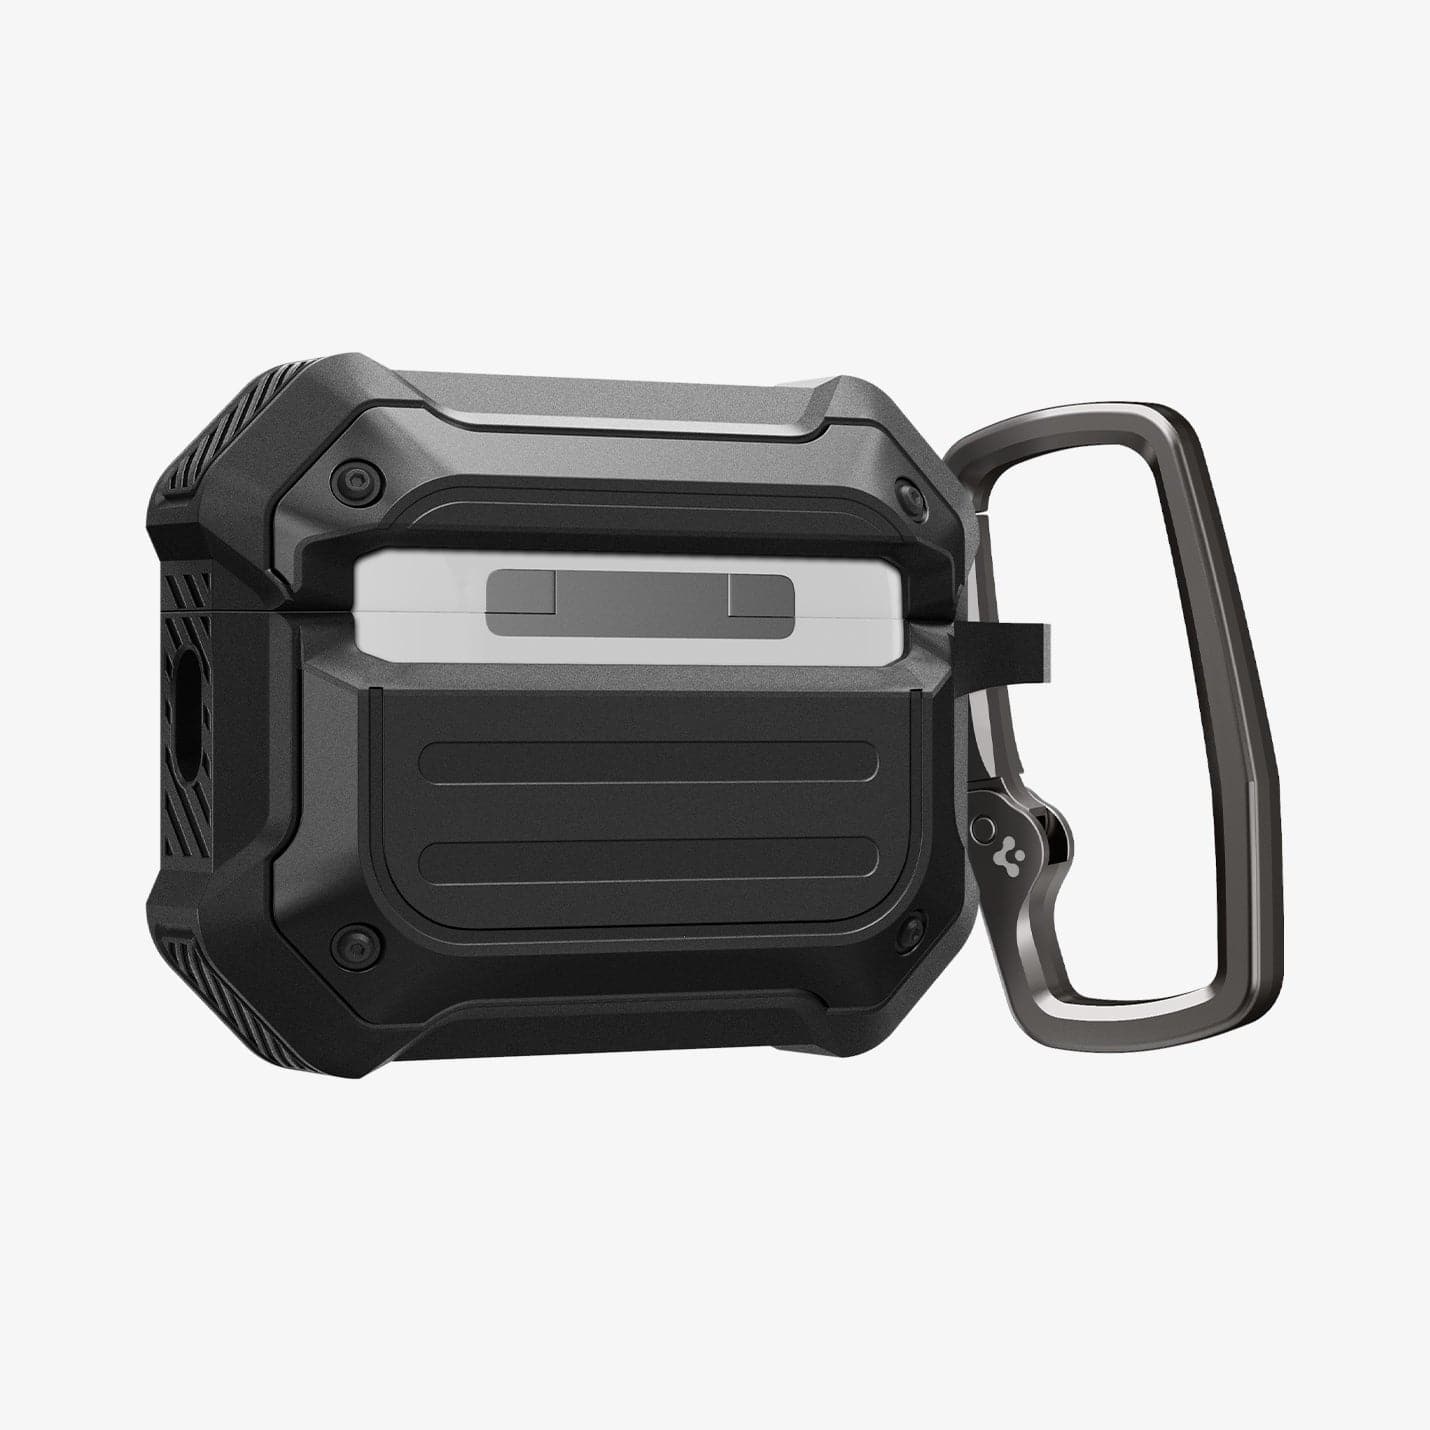 ACS05480 - Apple AirPods Pro 2 Case Tough Armor in black showing the back, side and carabiner